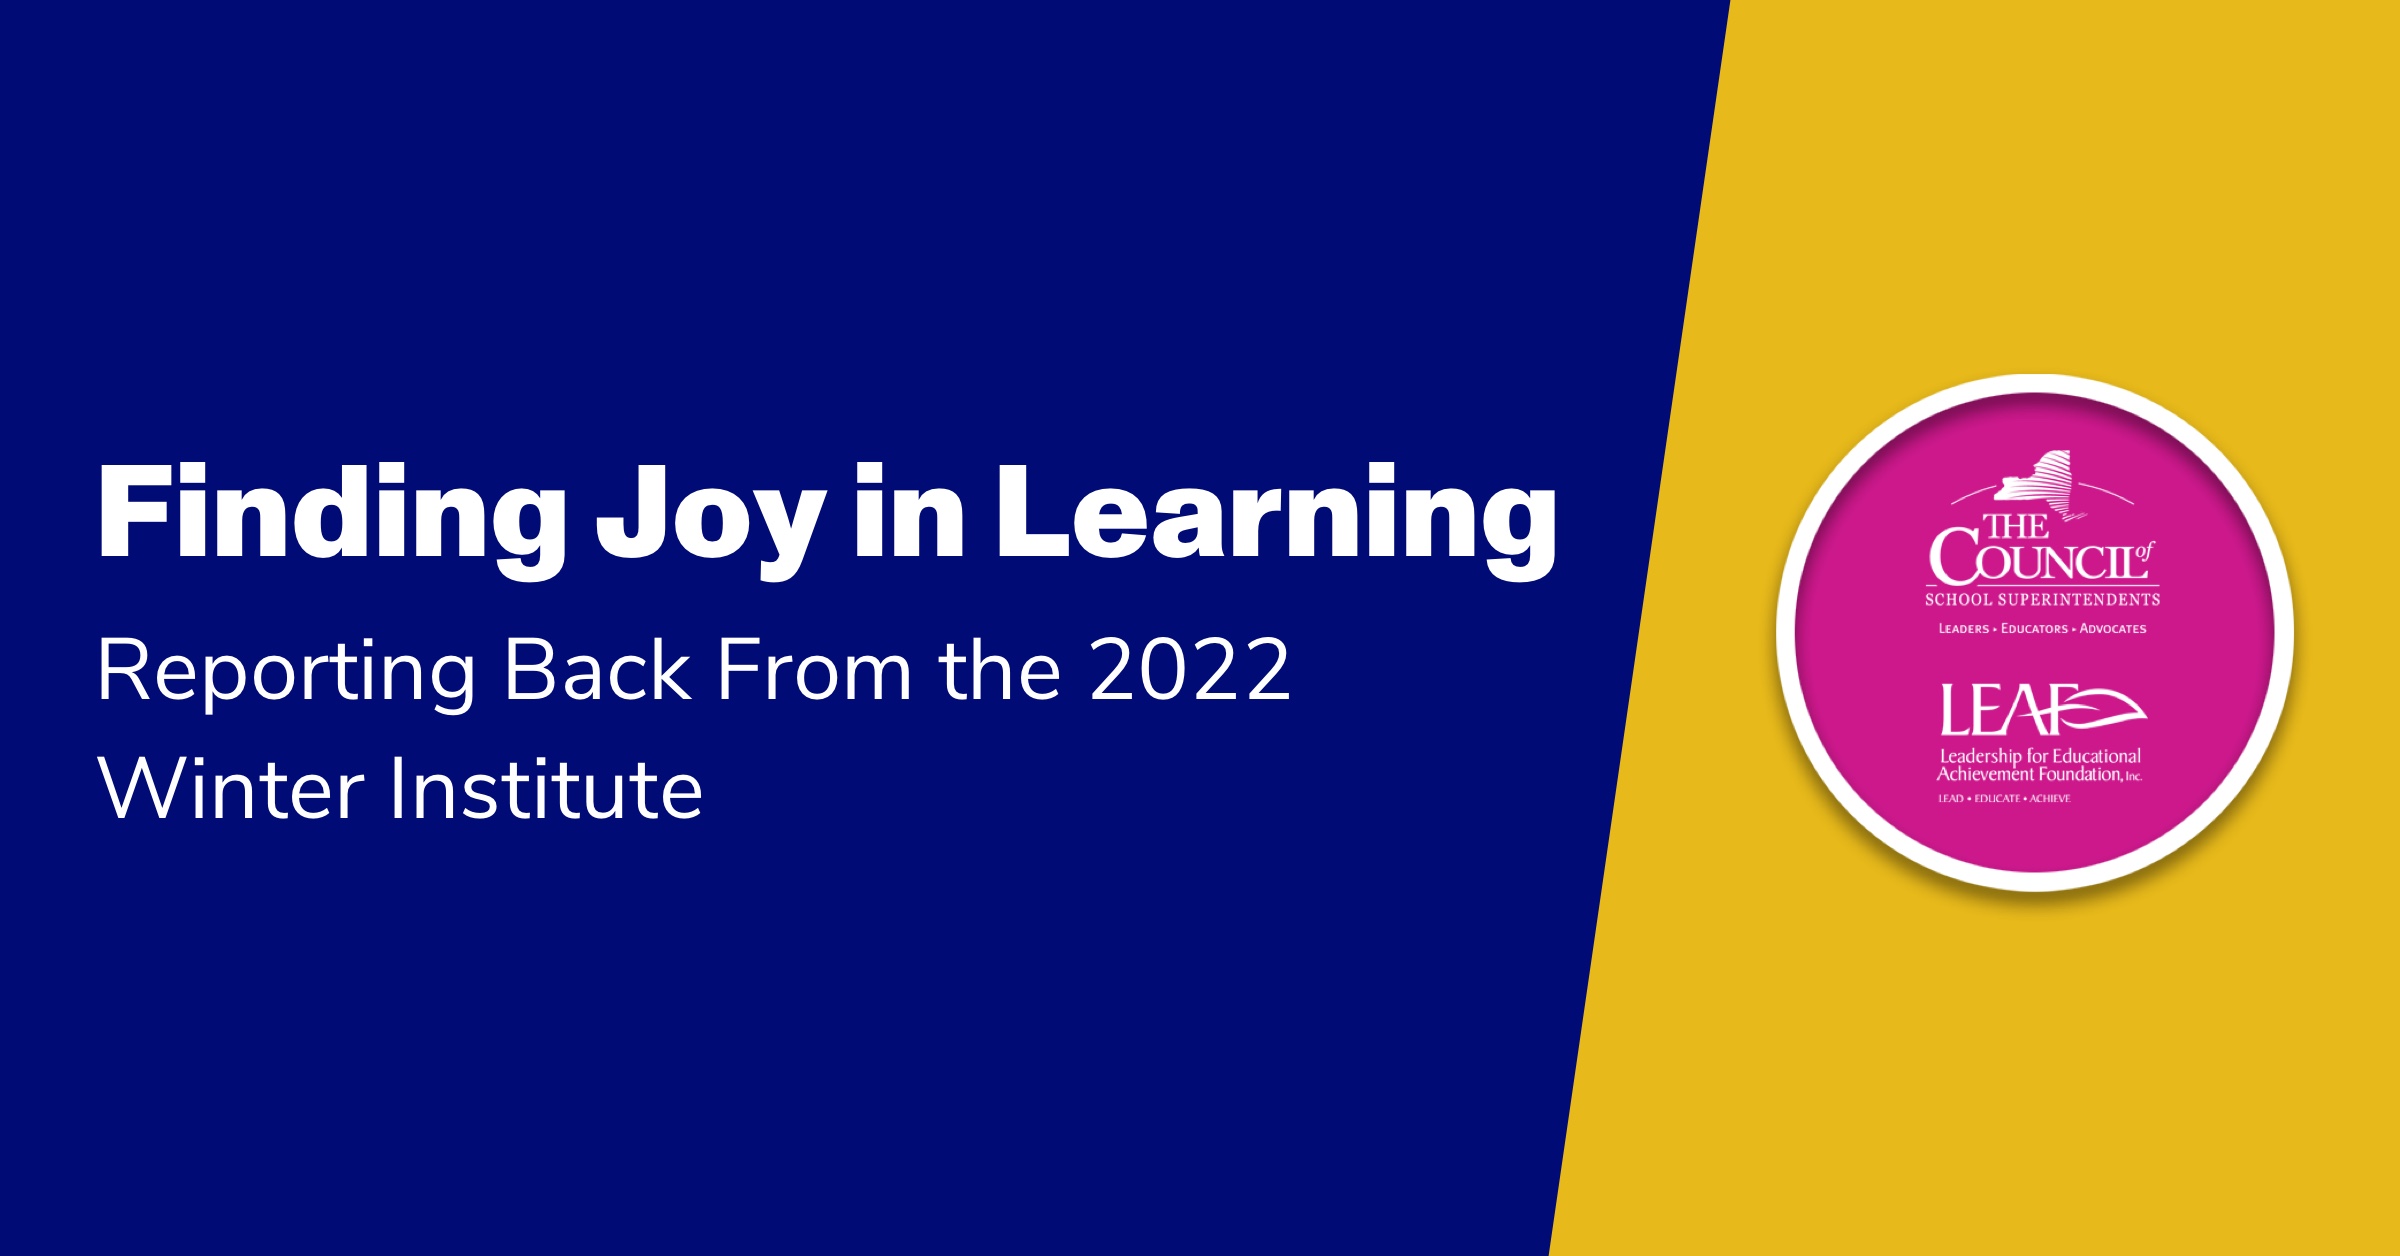 Finding Joy in Learning: Reporting Back From the 2022 Winter Institute